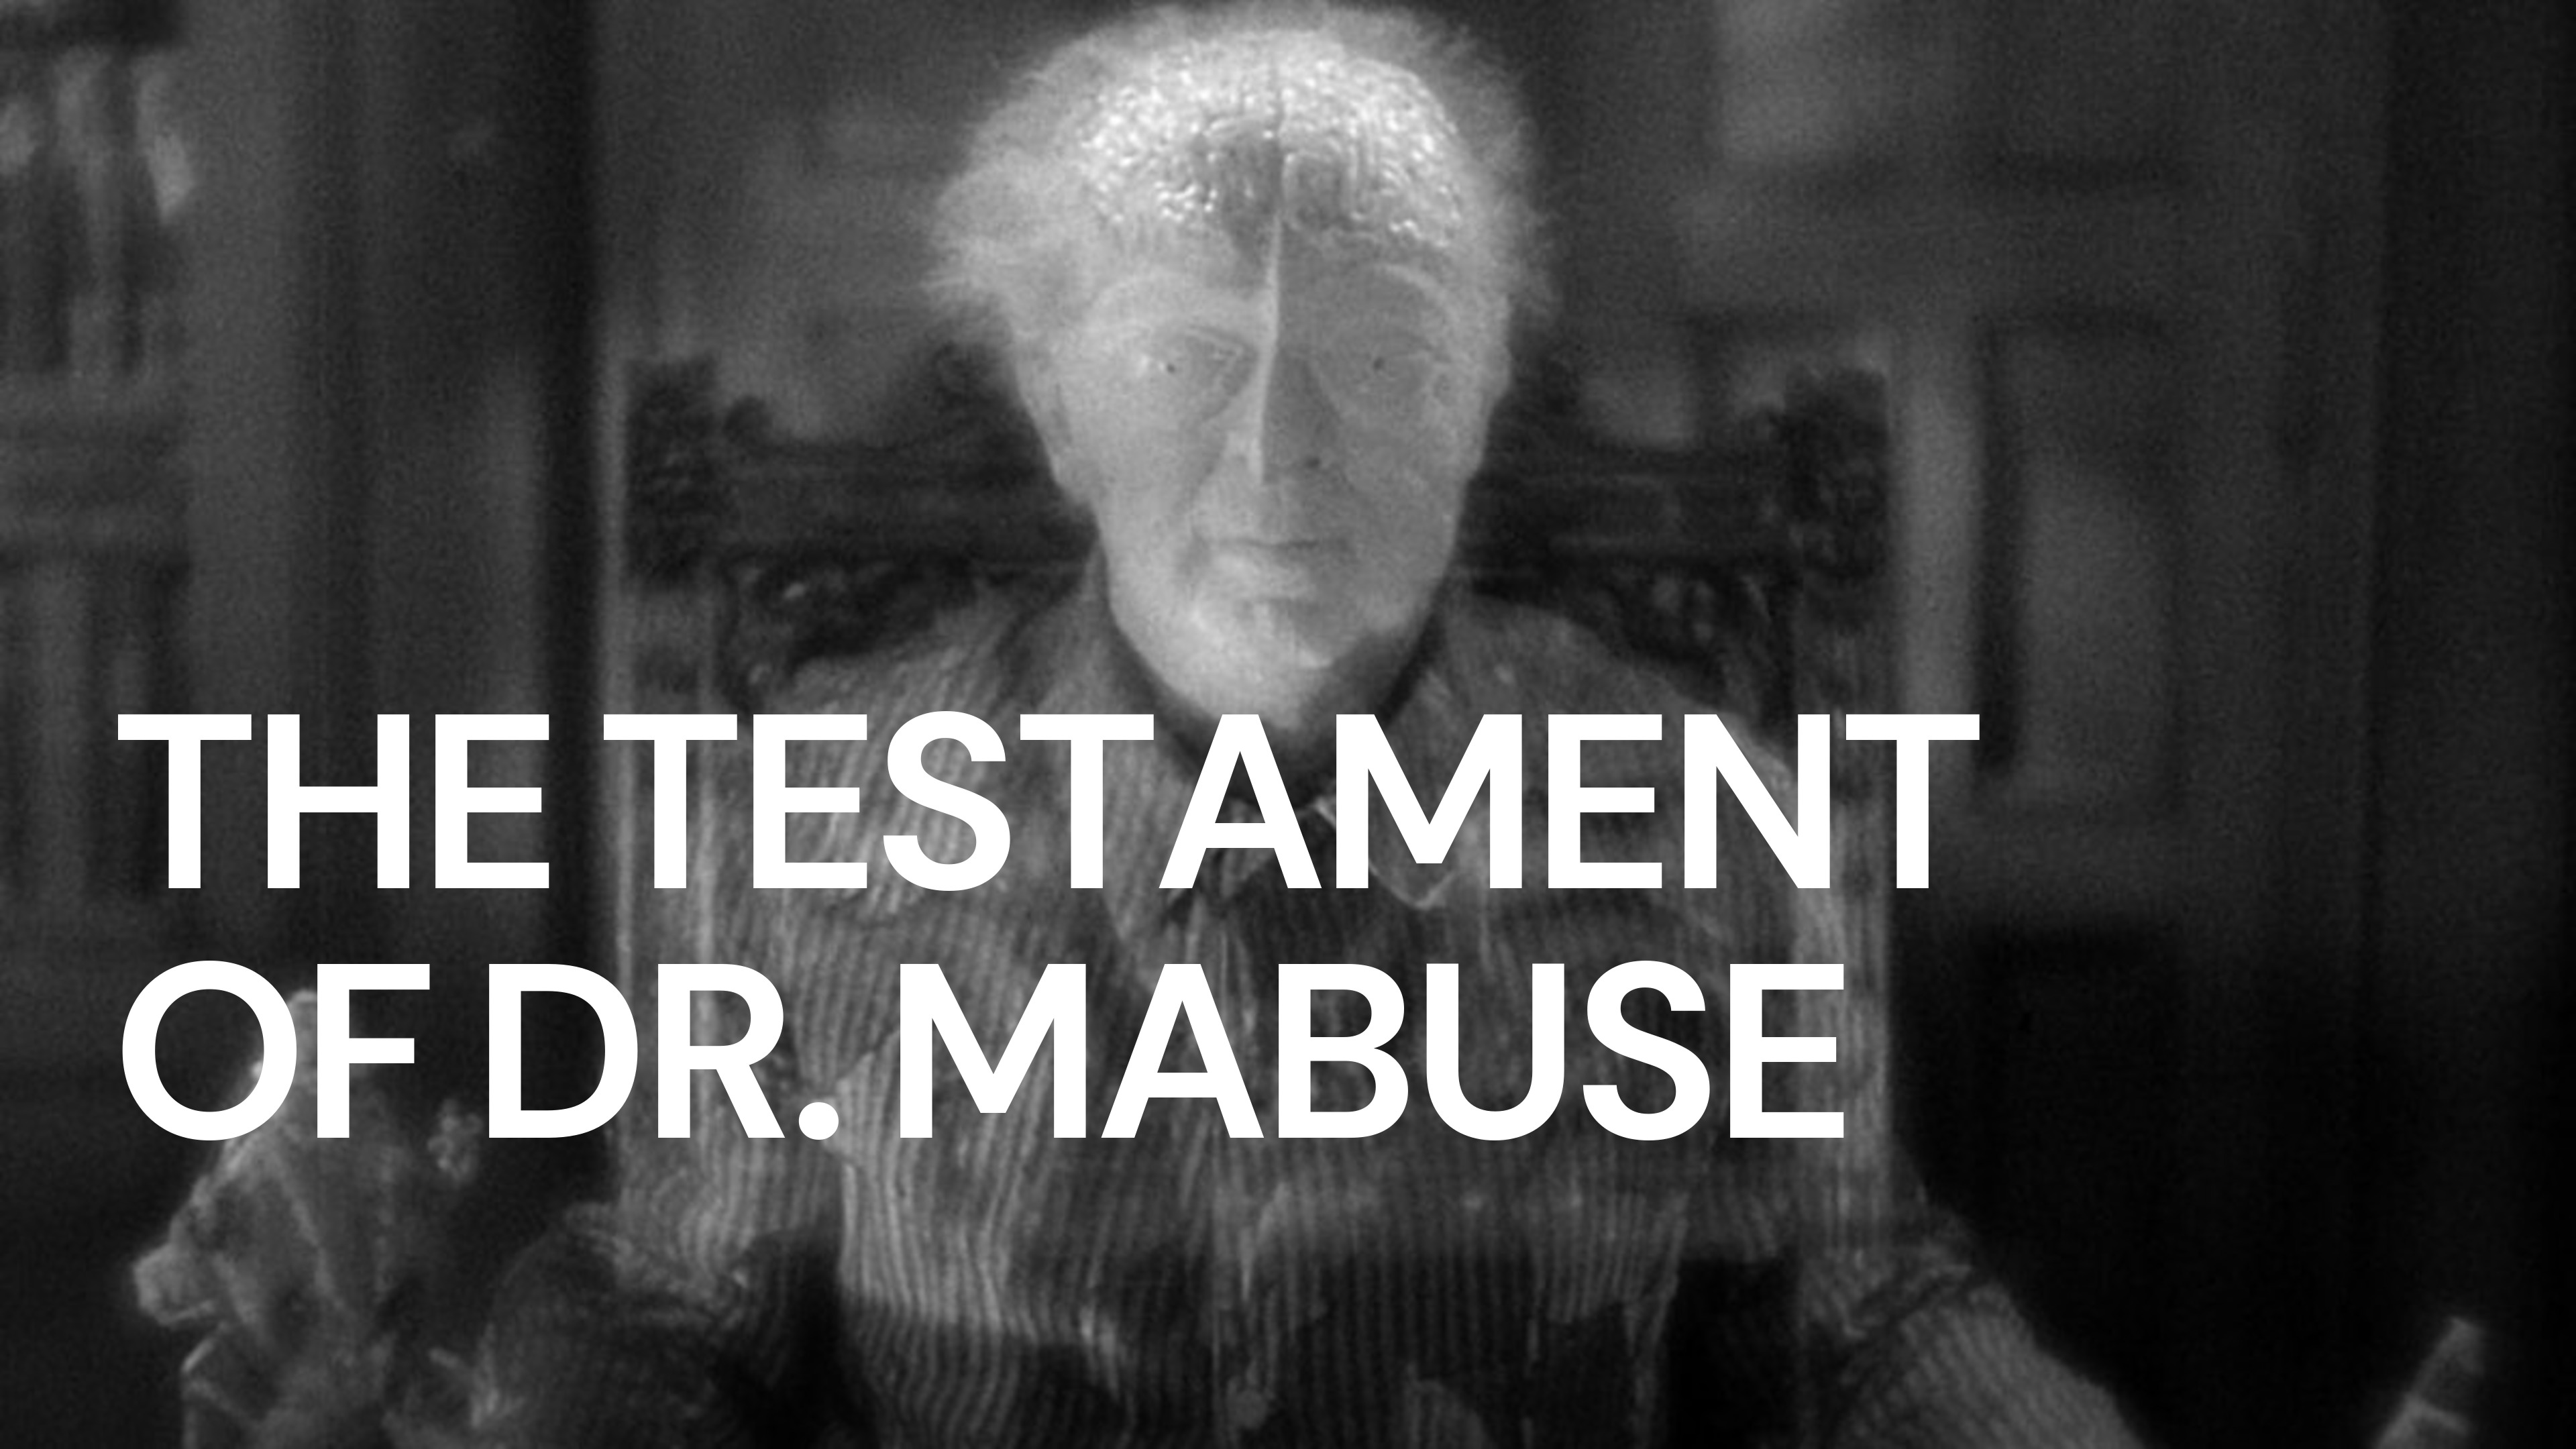 39-facts-about-the-movie-the-testament-of-dr-mabuse